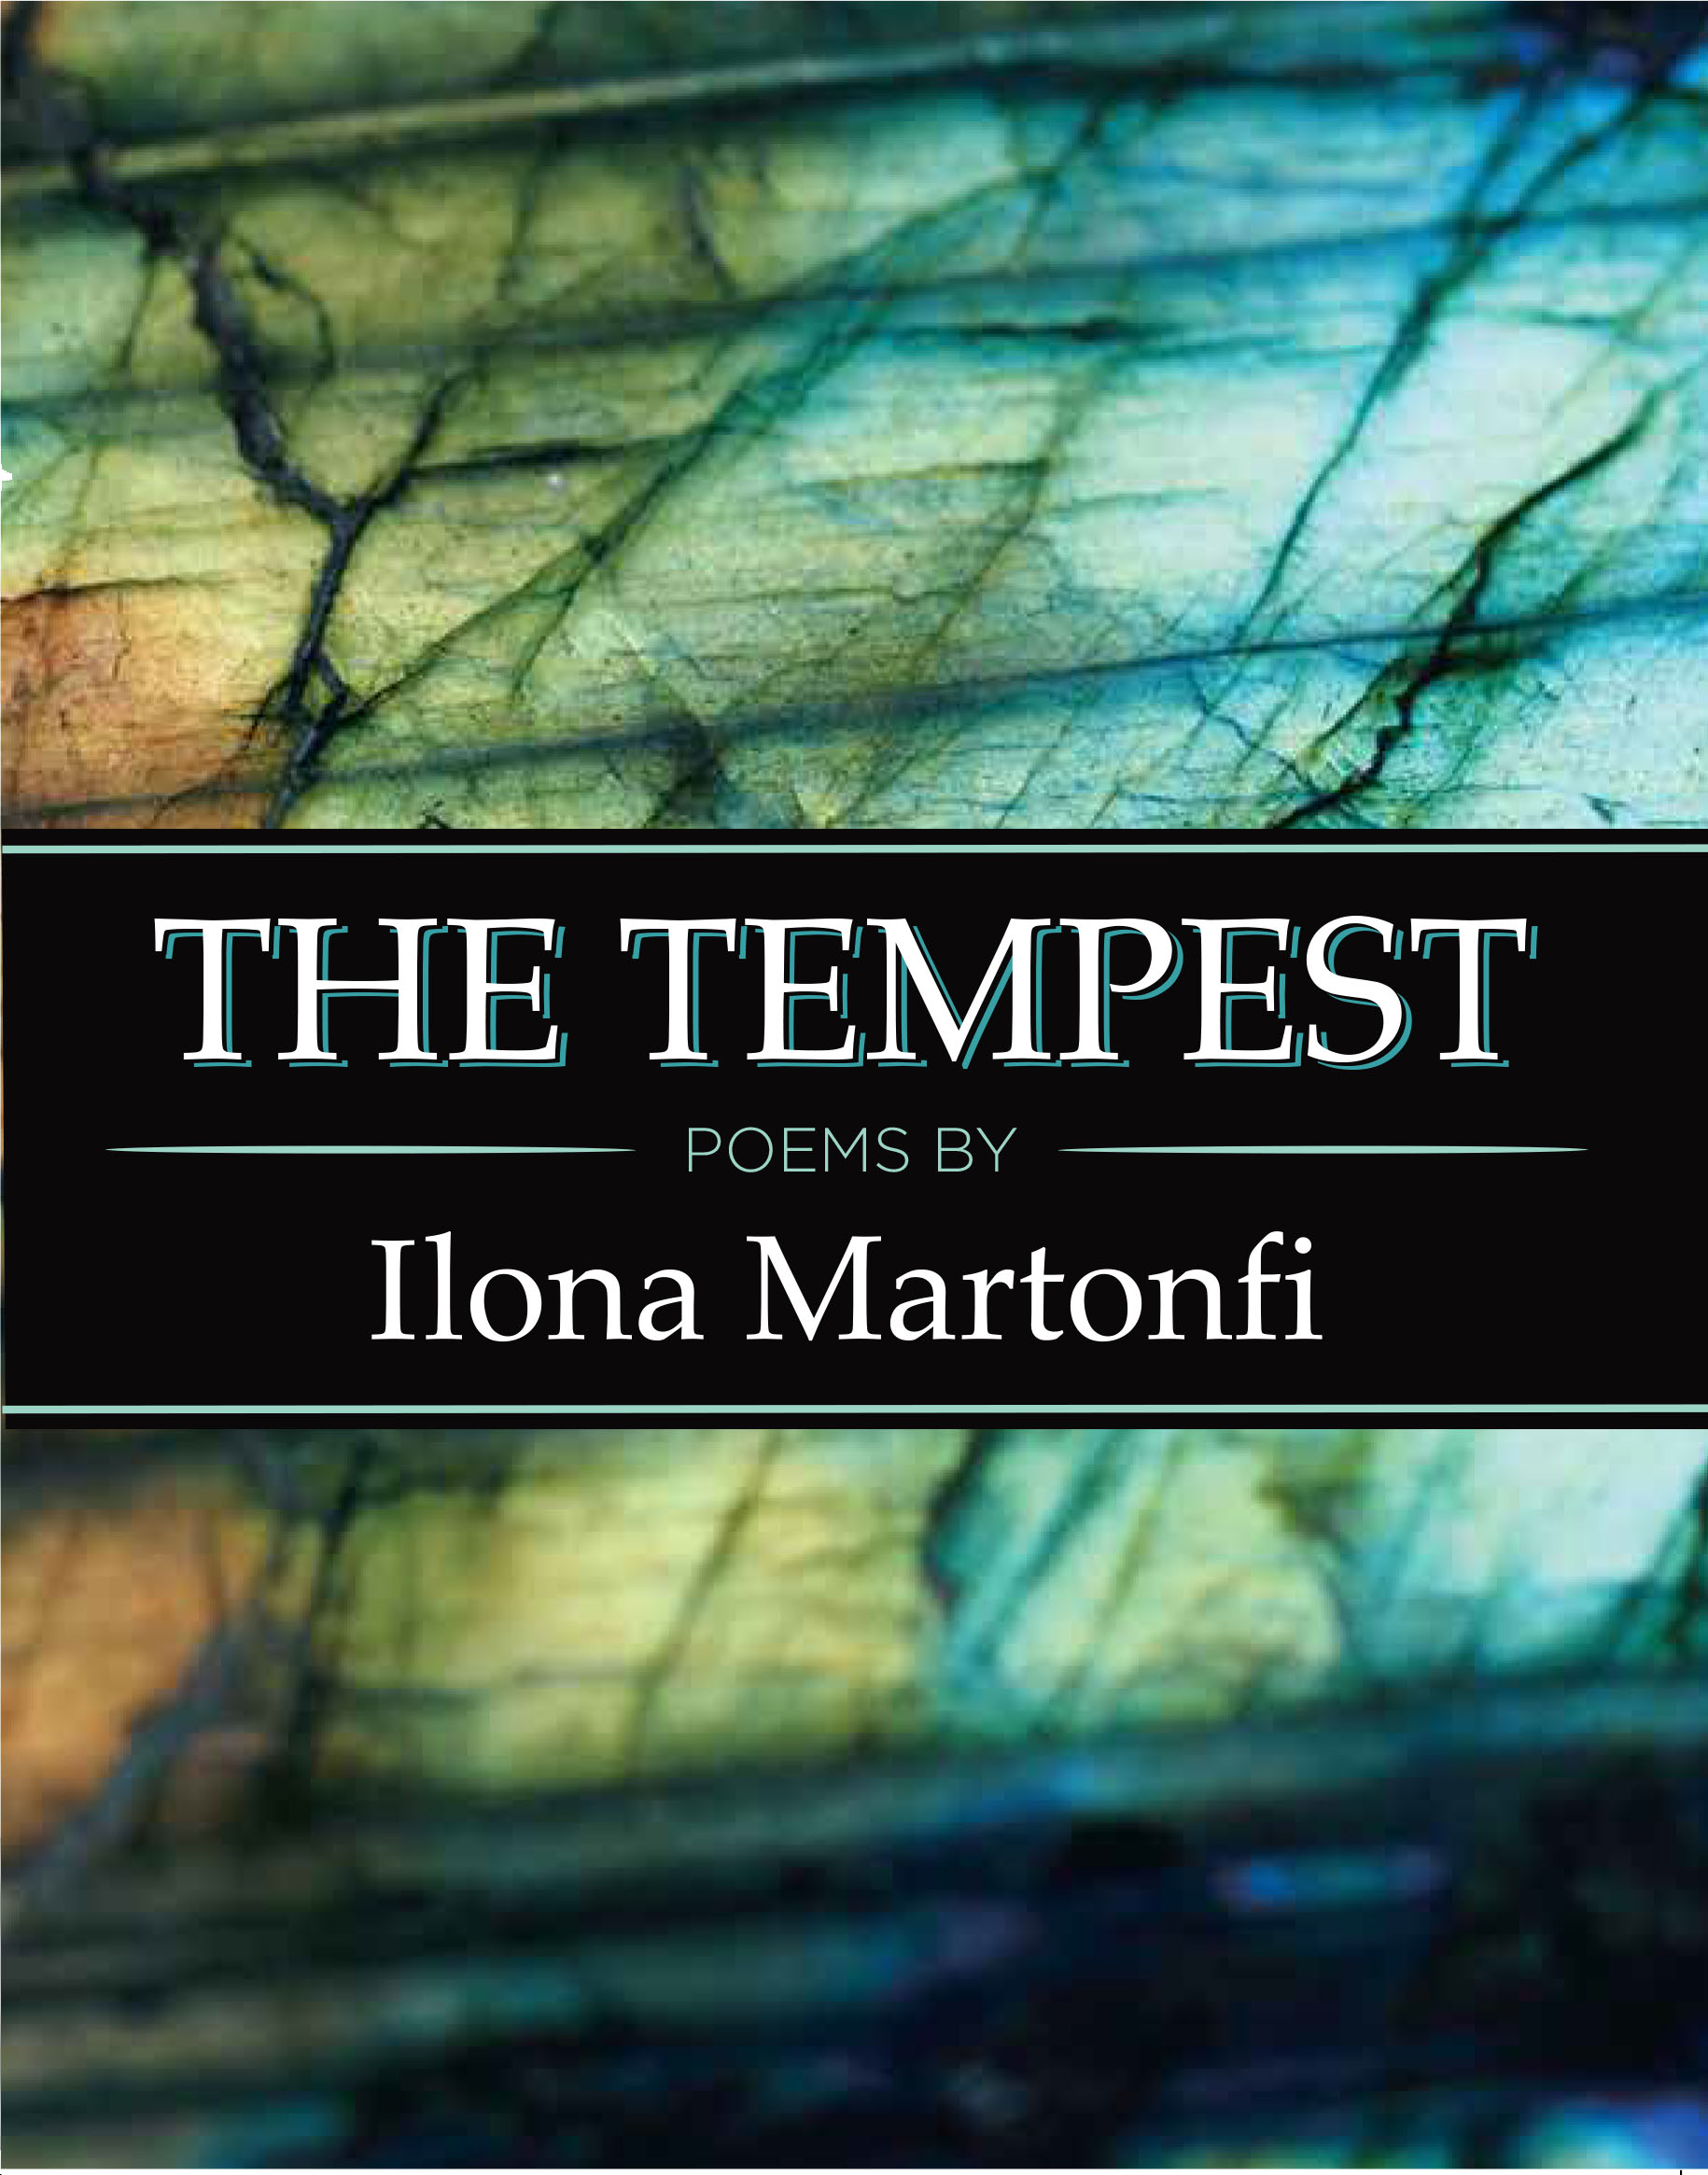 book cover with a multi-colour labradorite background (green, yellow, orange). With white block typography against a black banner in the middle of the cover: "The Tempest" and "poems by Ilona Martonfi".